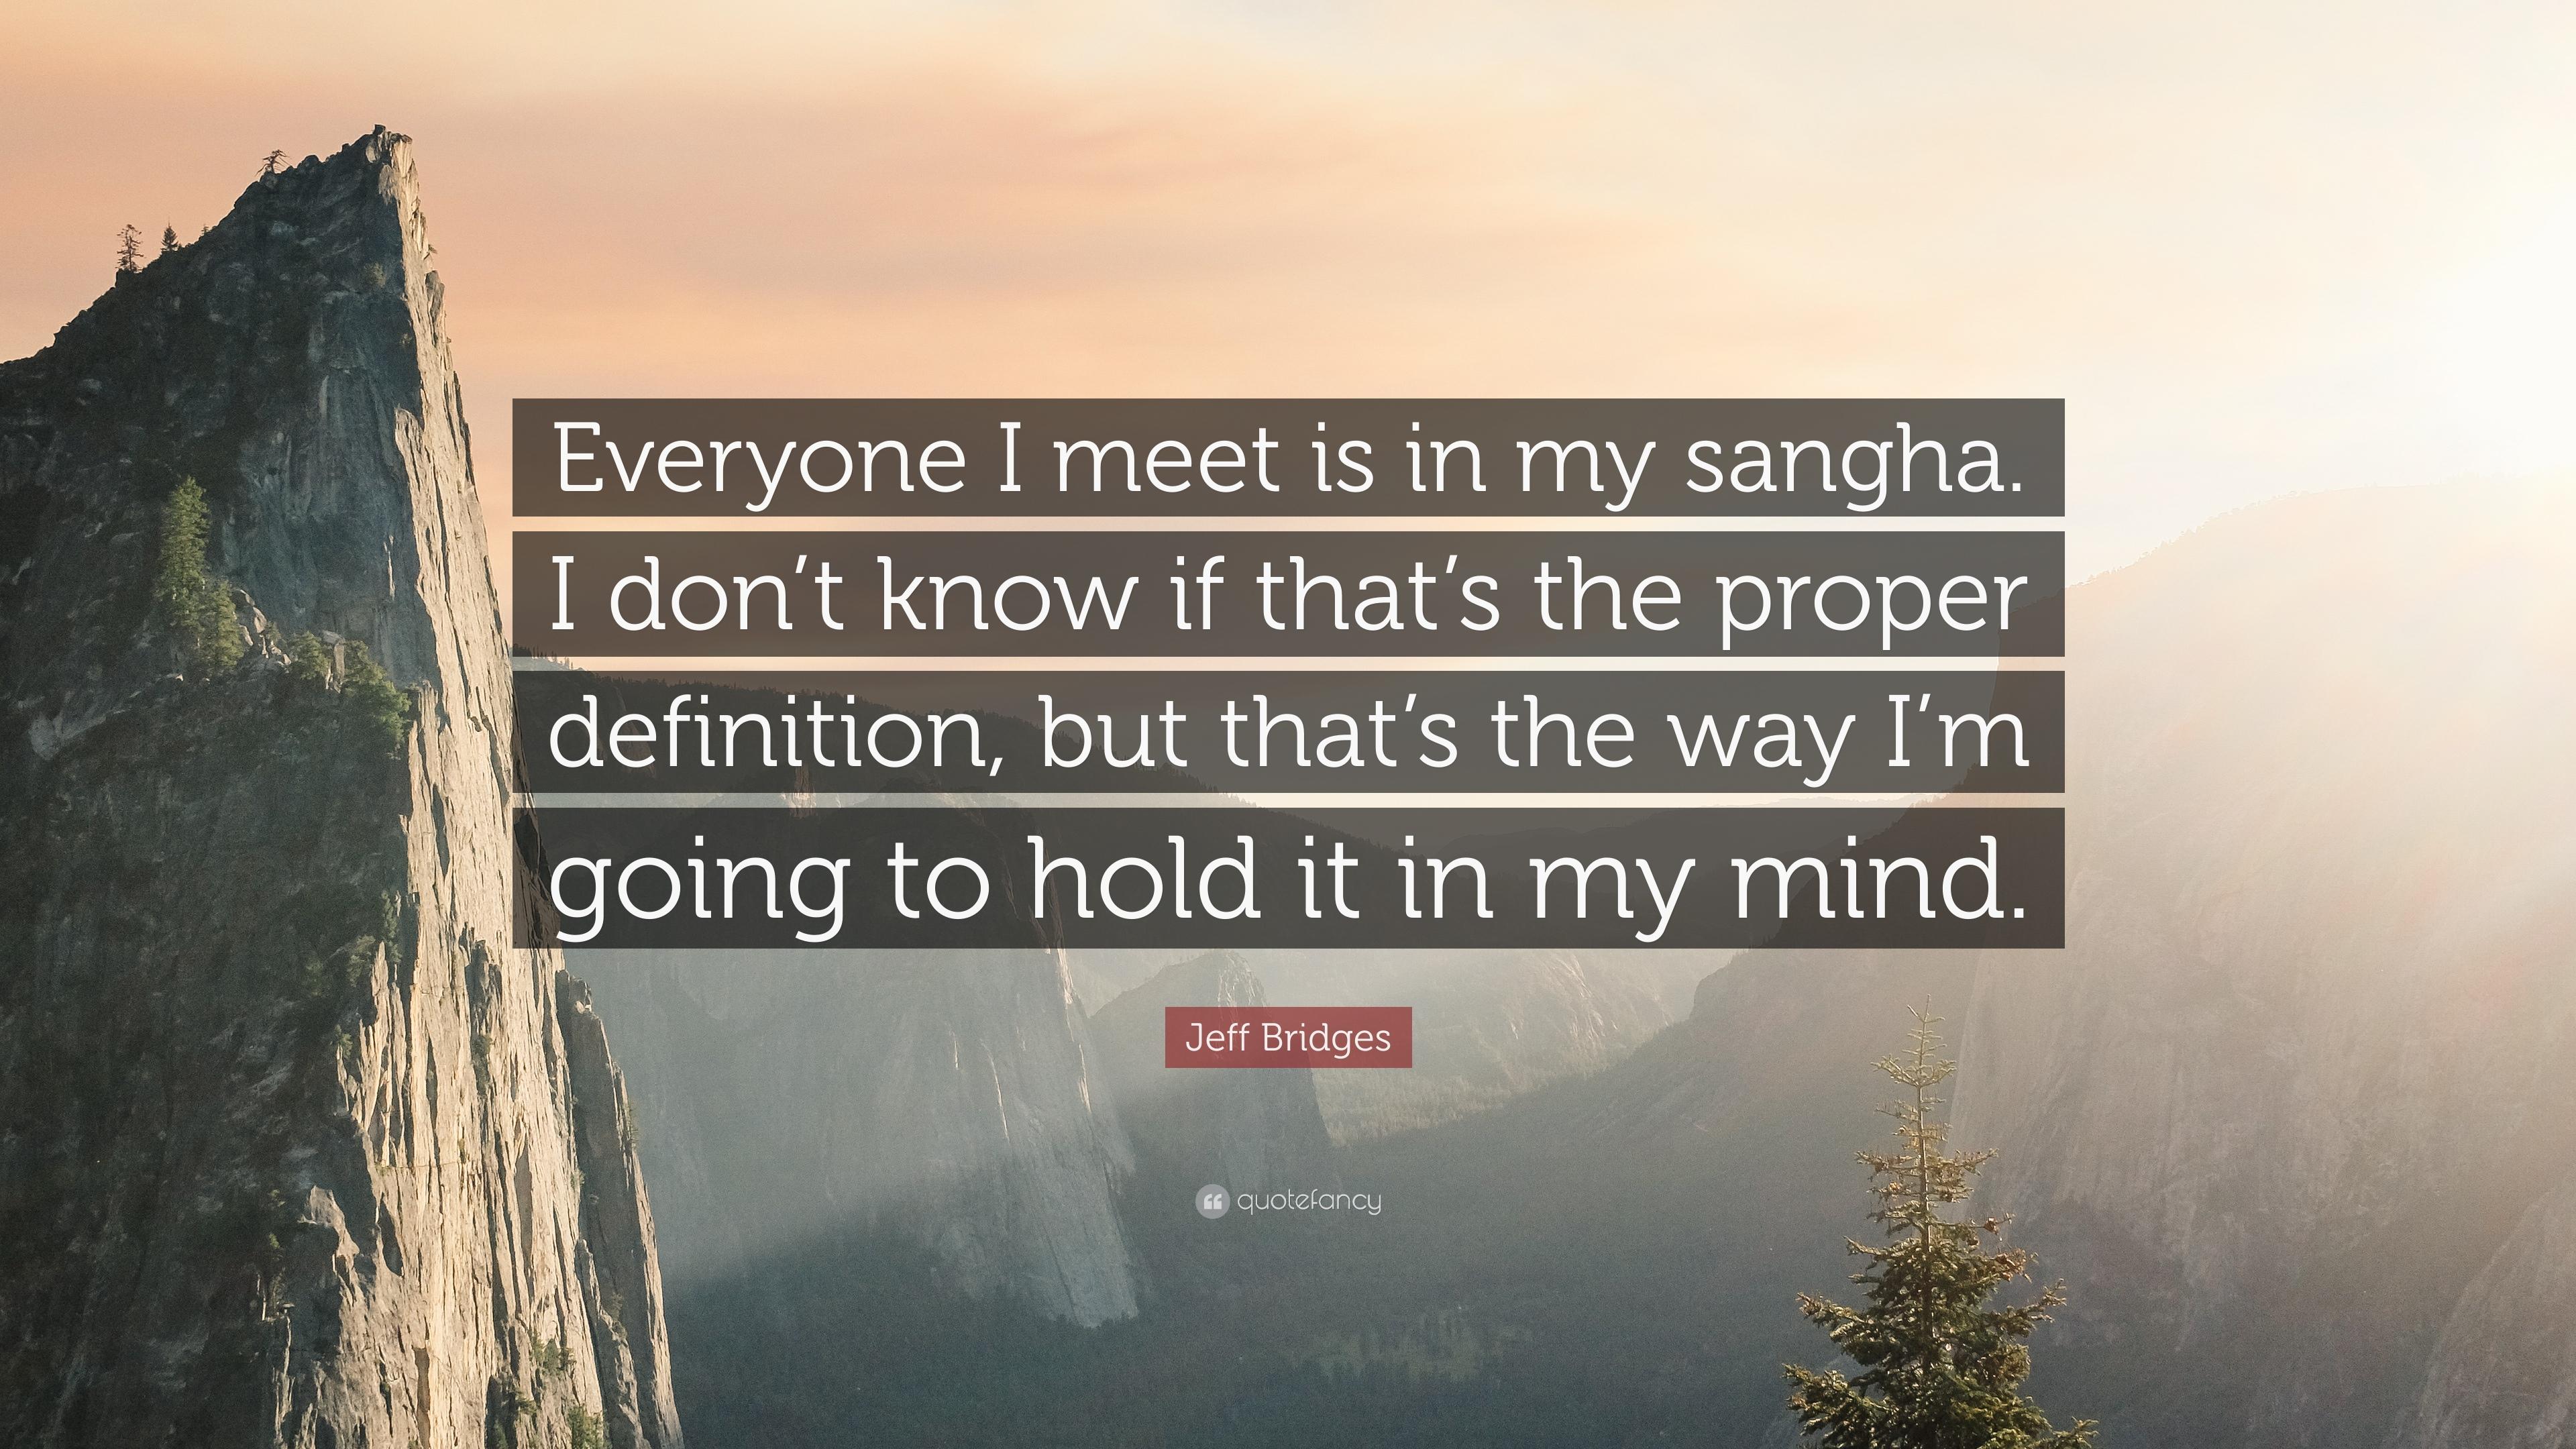 Jeff Bridges Quote: “Everyone I meet is in my sangha. I don't know